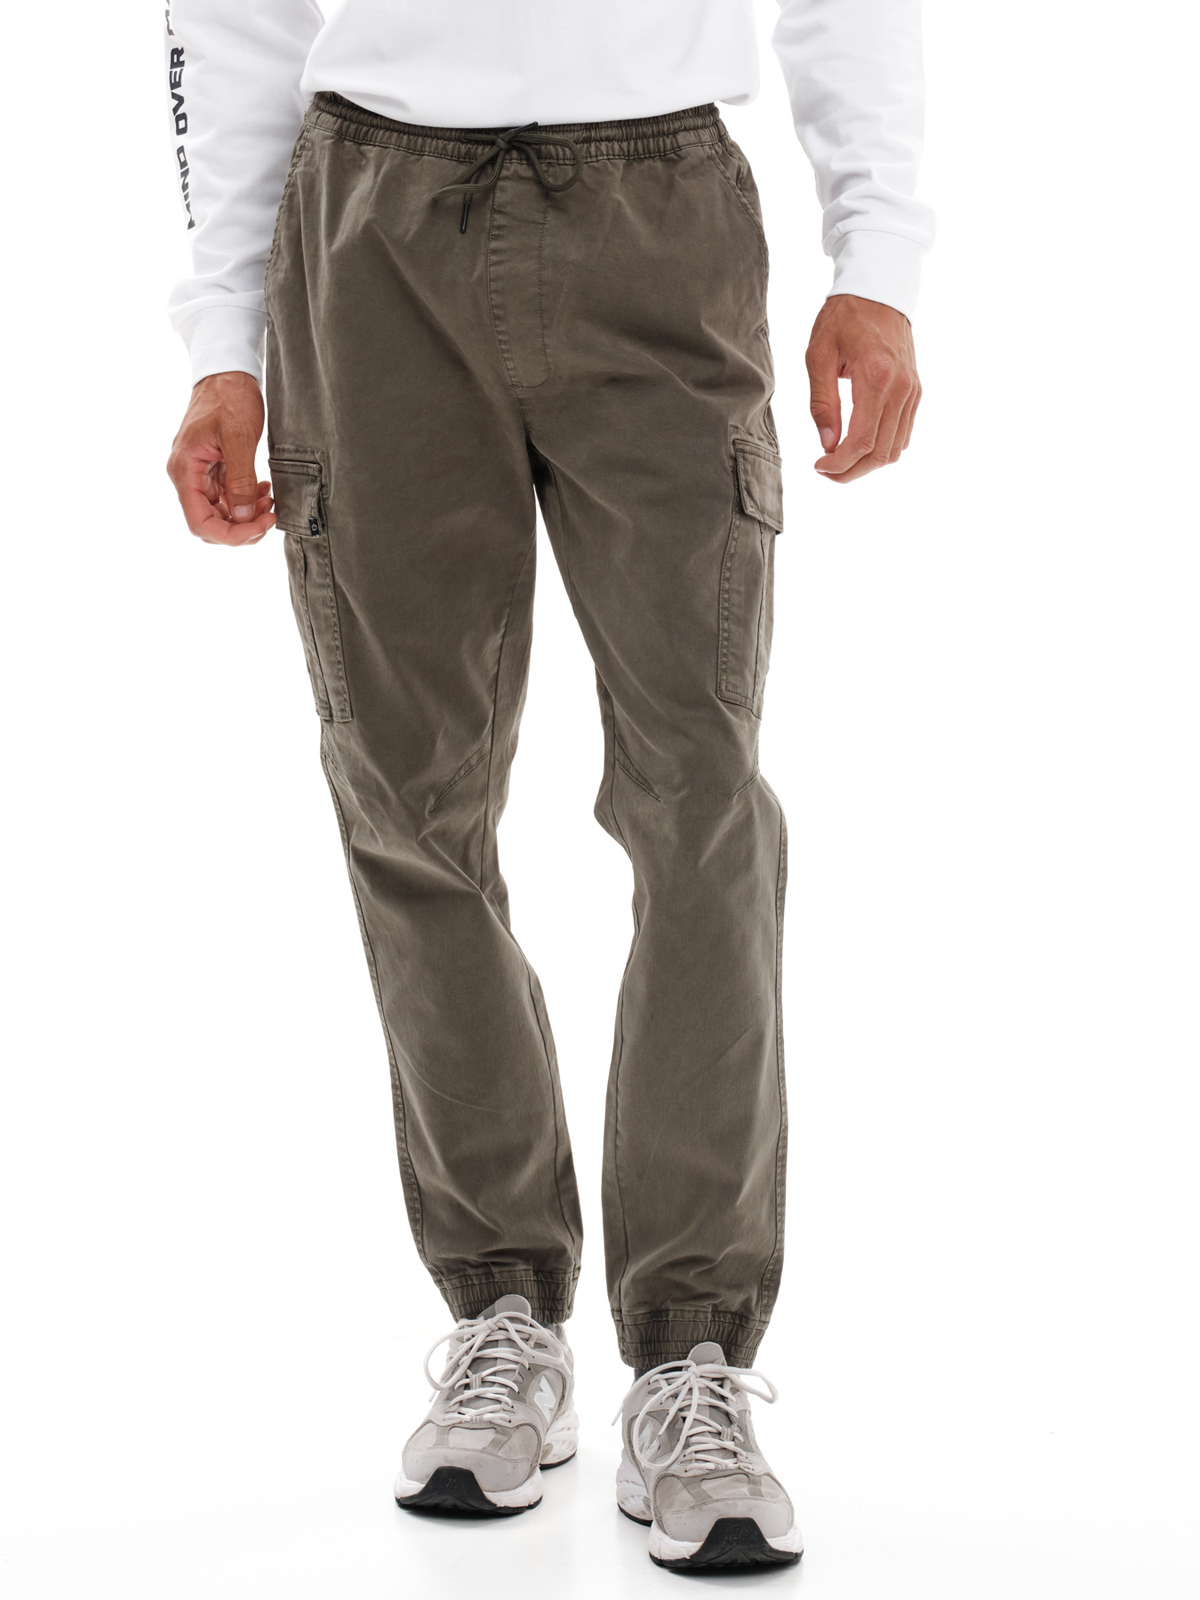 Emerson - MEN'S CUFFED CARGO PANTS - OLIVE